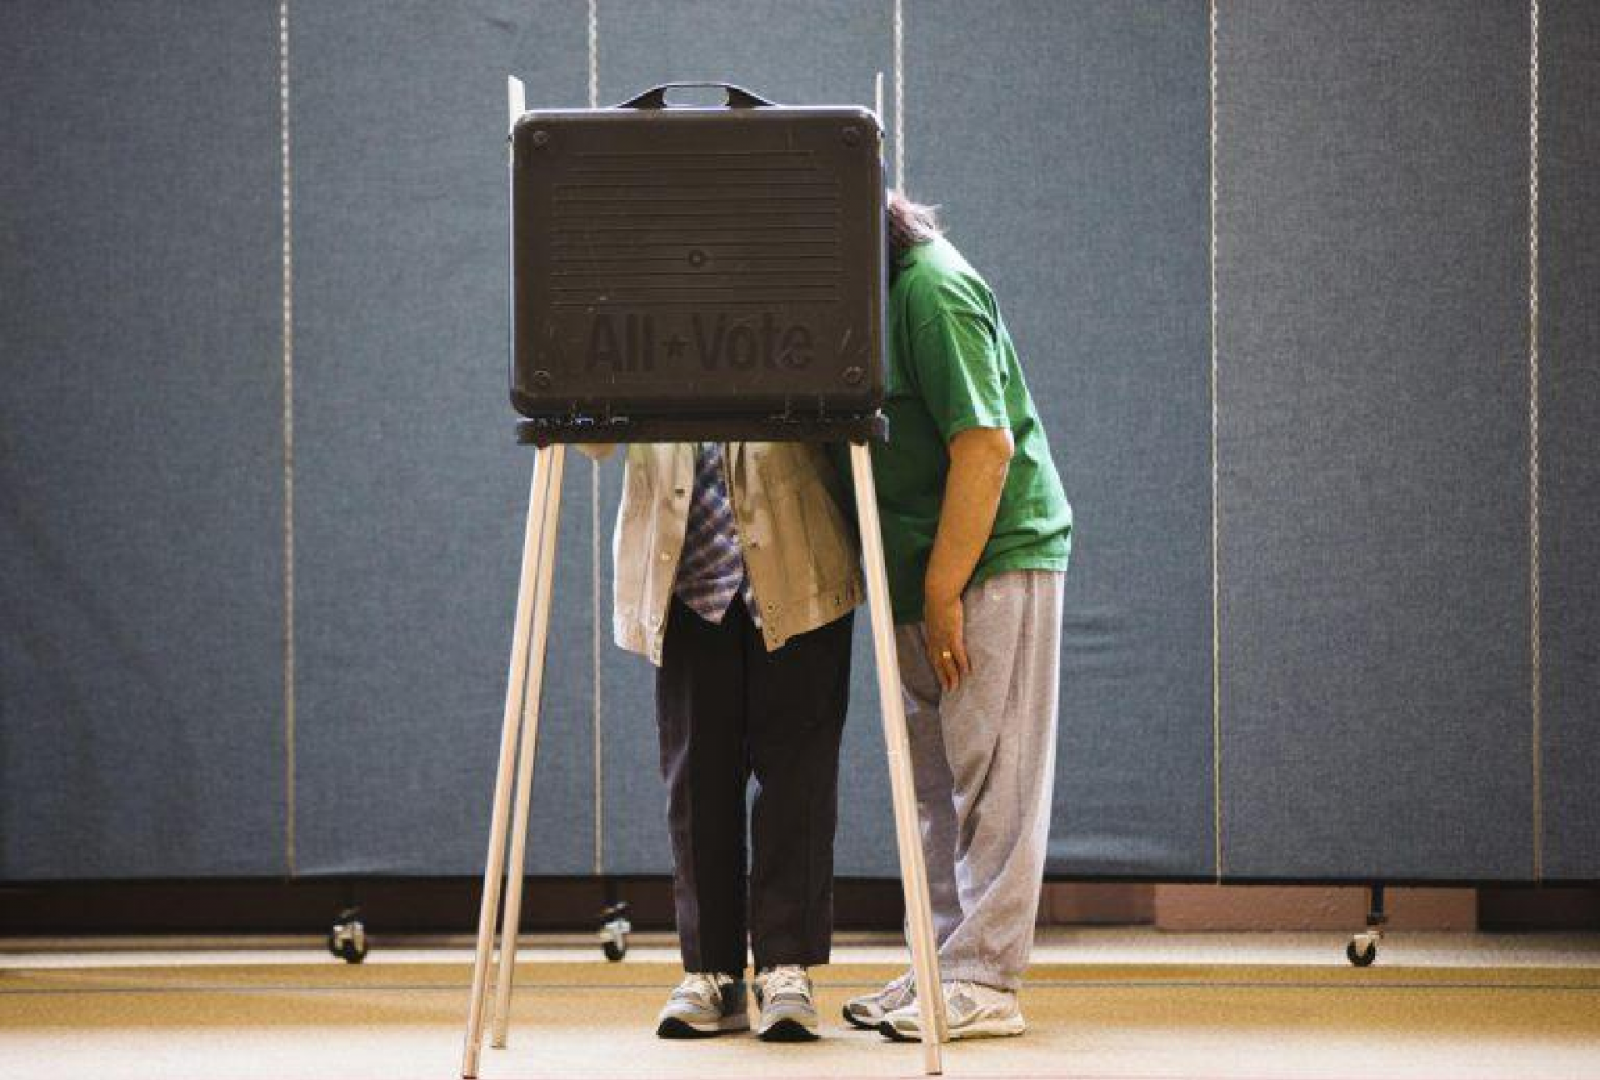 Allegheny County hopes to hire at least 6,500 poll workers ahead of the November election.